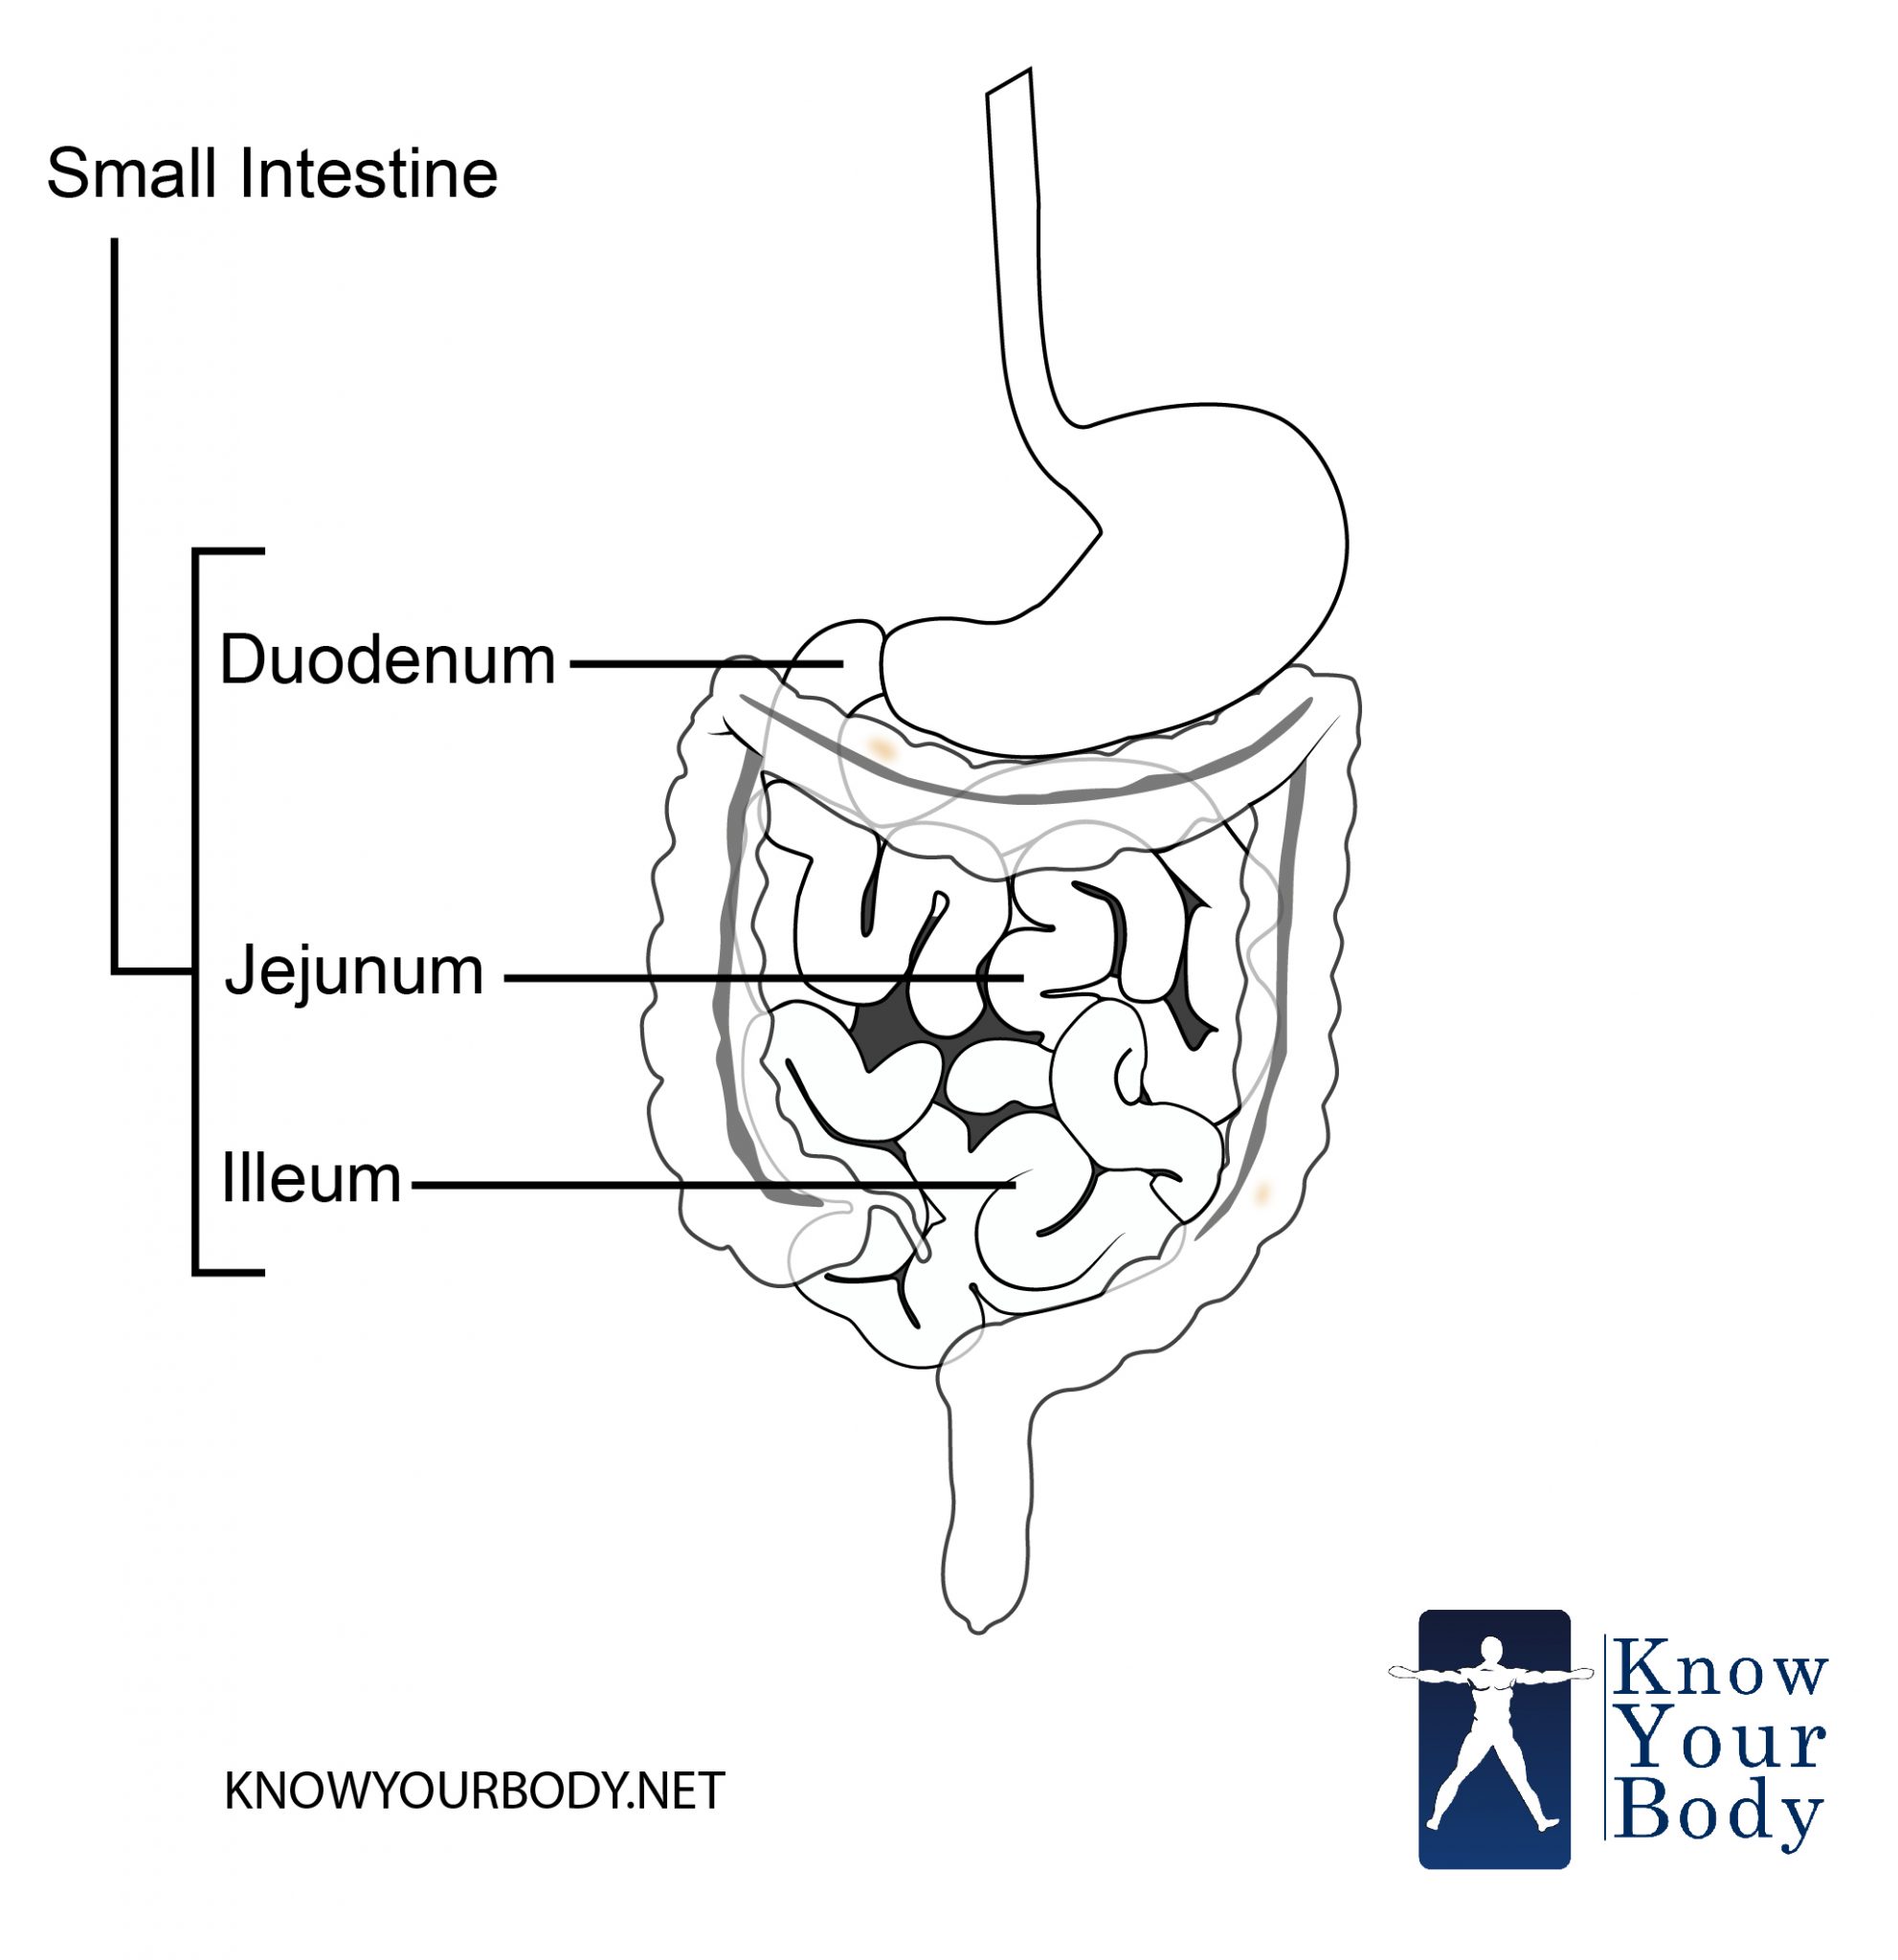 Small Intestine - Function, Anatomy, Location, Length and Diagram